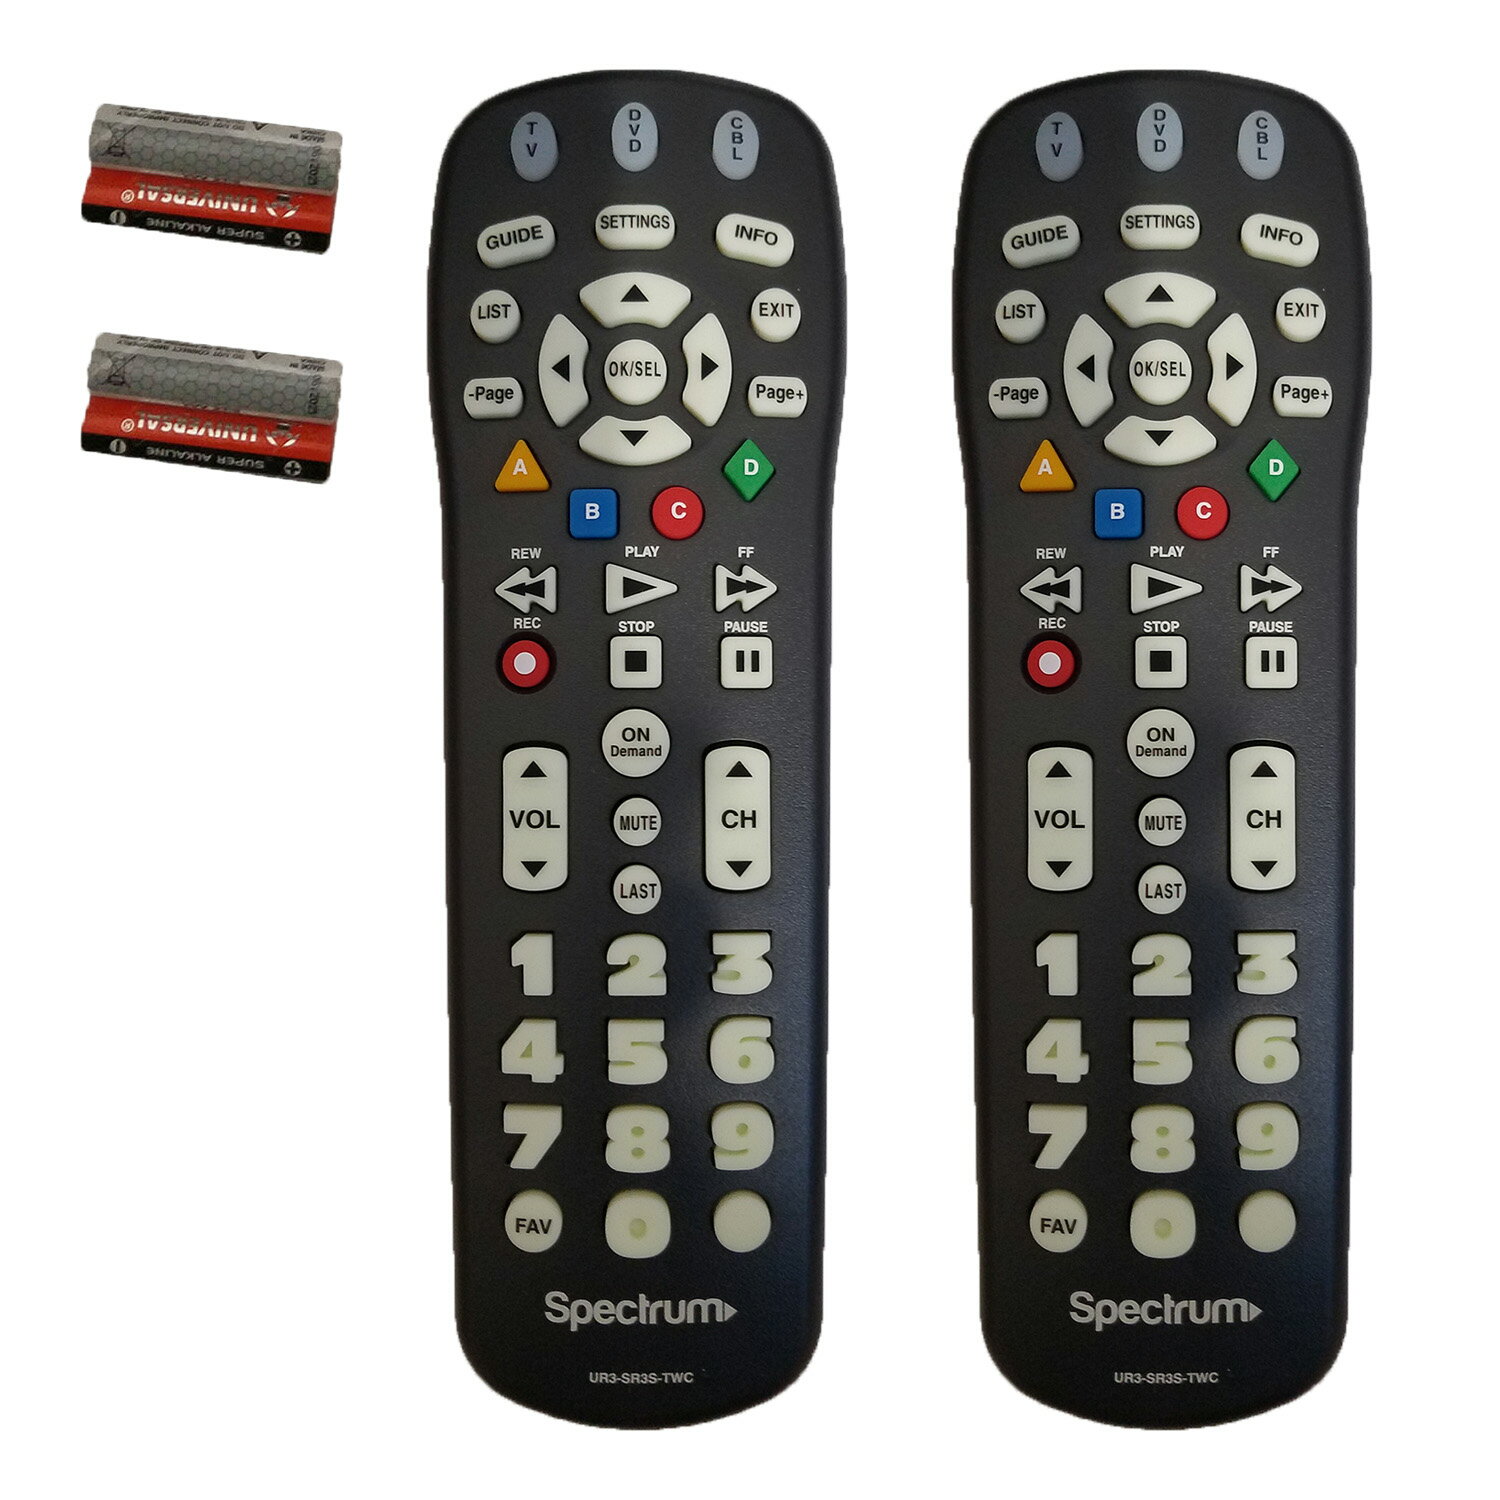 Is there any user manual for spectrum tv remote codes